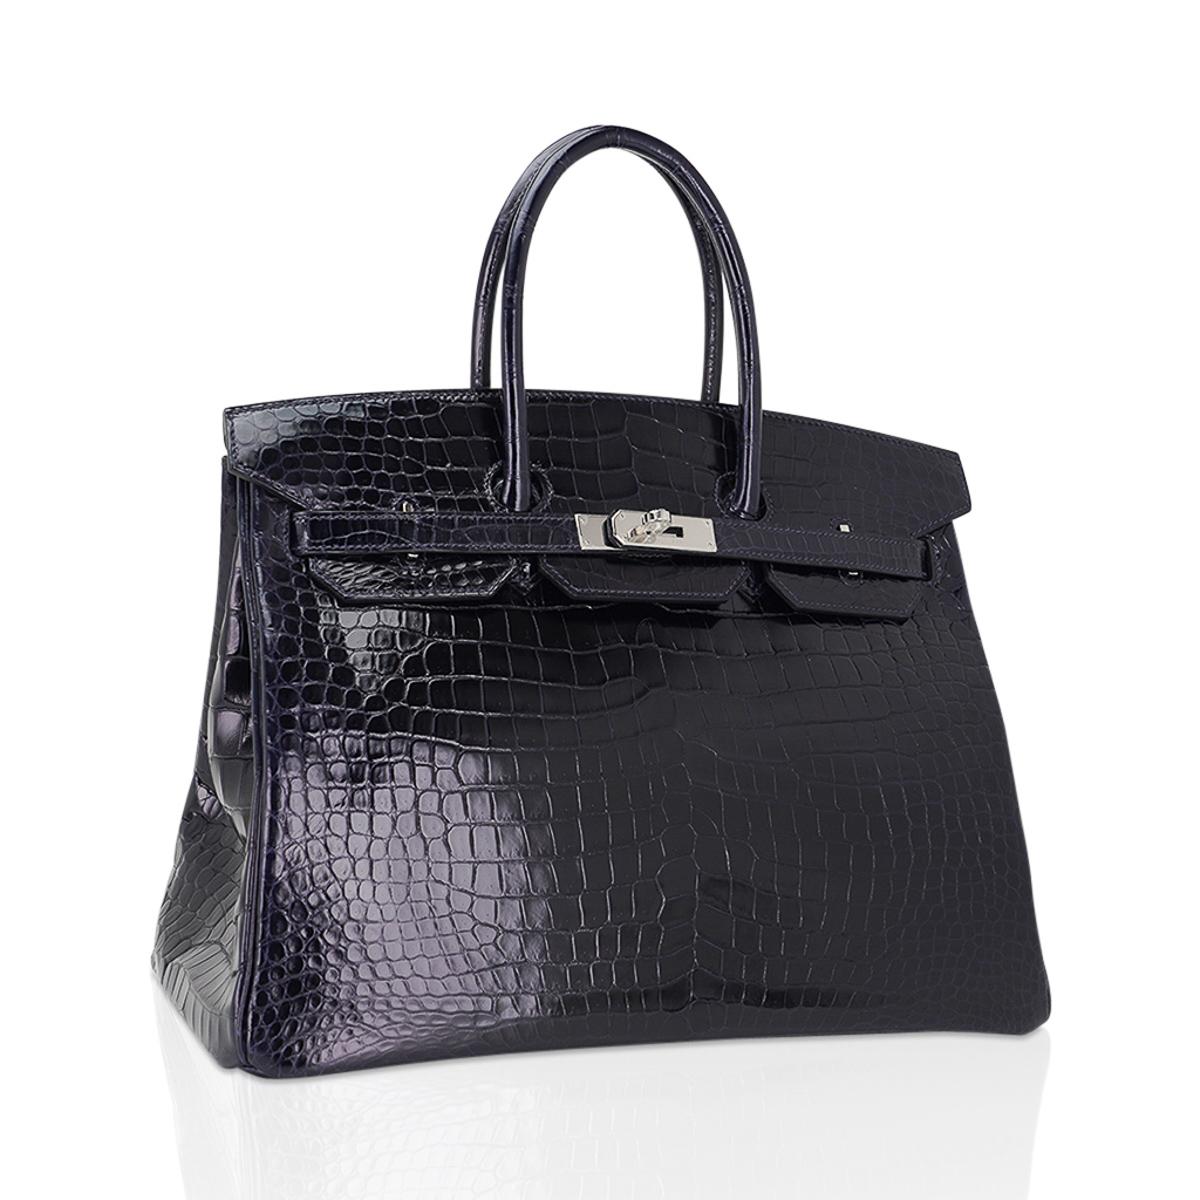 Mightychic offers an Hermes Birkin 35 bag featured in rich dark Blue Marine Porosus Crocodile.
Gorgeous with fresh Palladium hardware.
Porosus Hermes crocodile skin has the smallest of the scales and is the most exclusive.  
Comes with lock, keys,